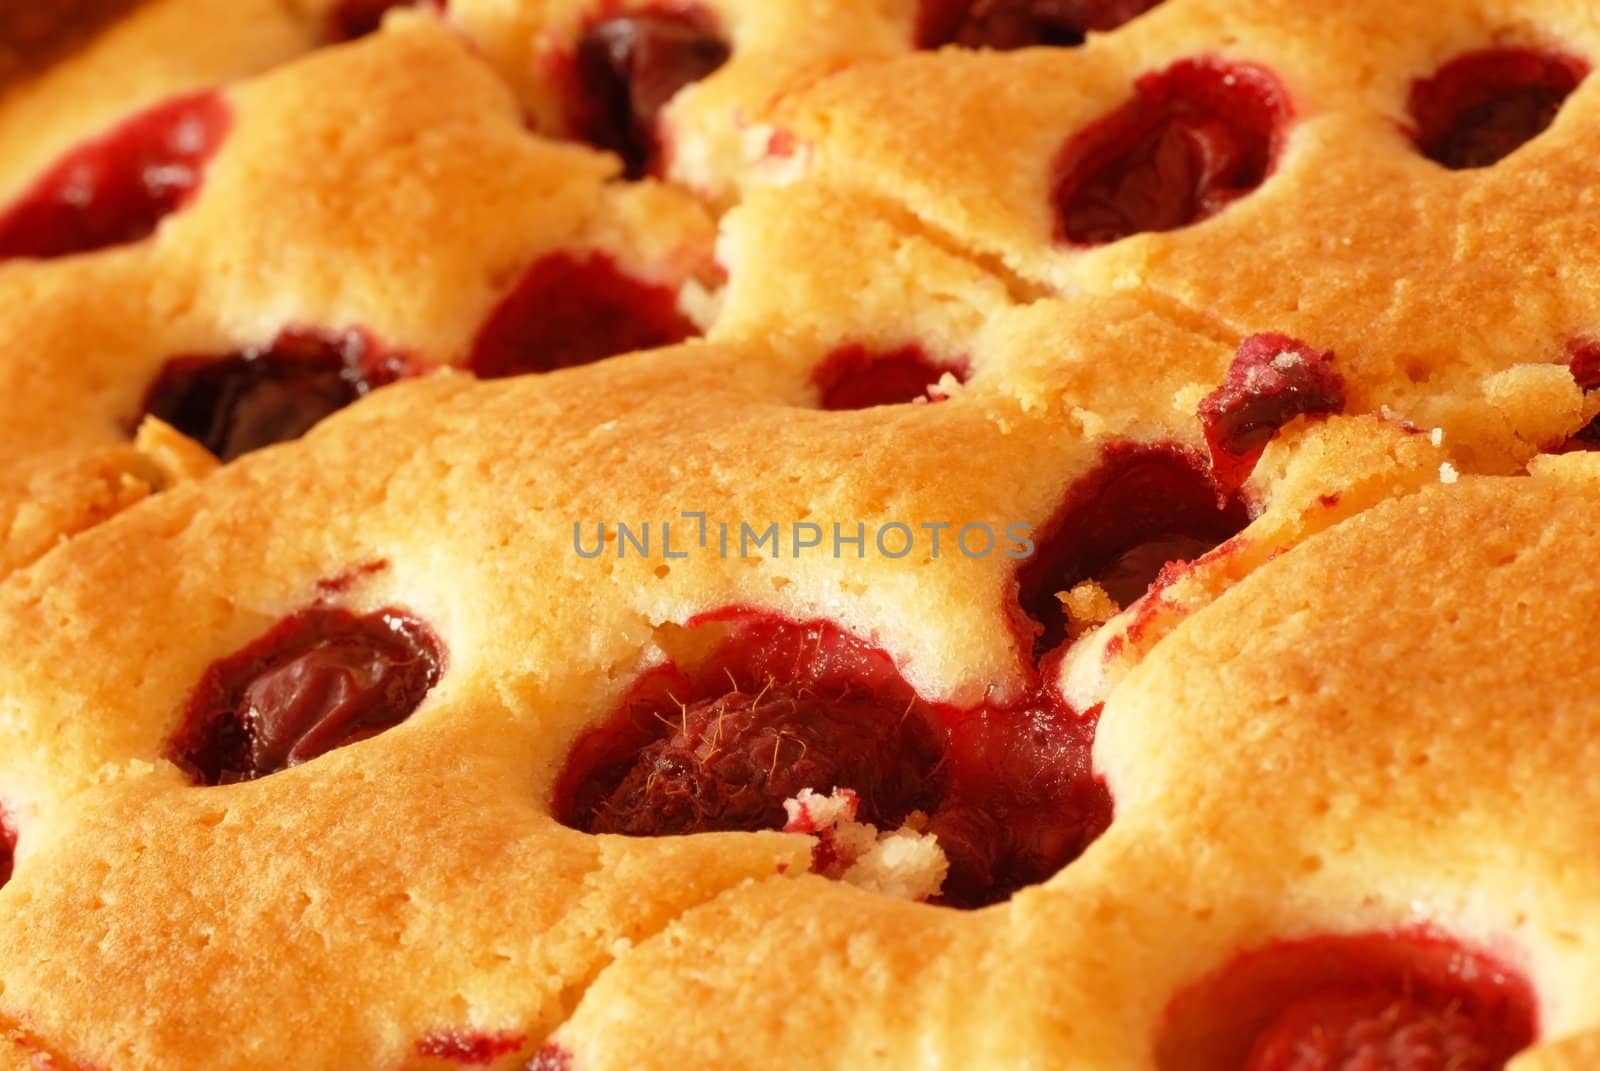 Cake with cherries and raspberries by simply